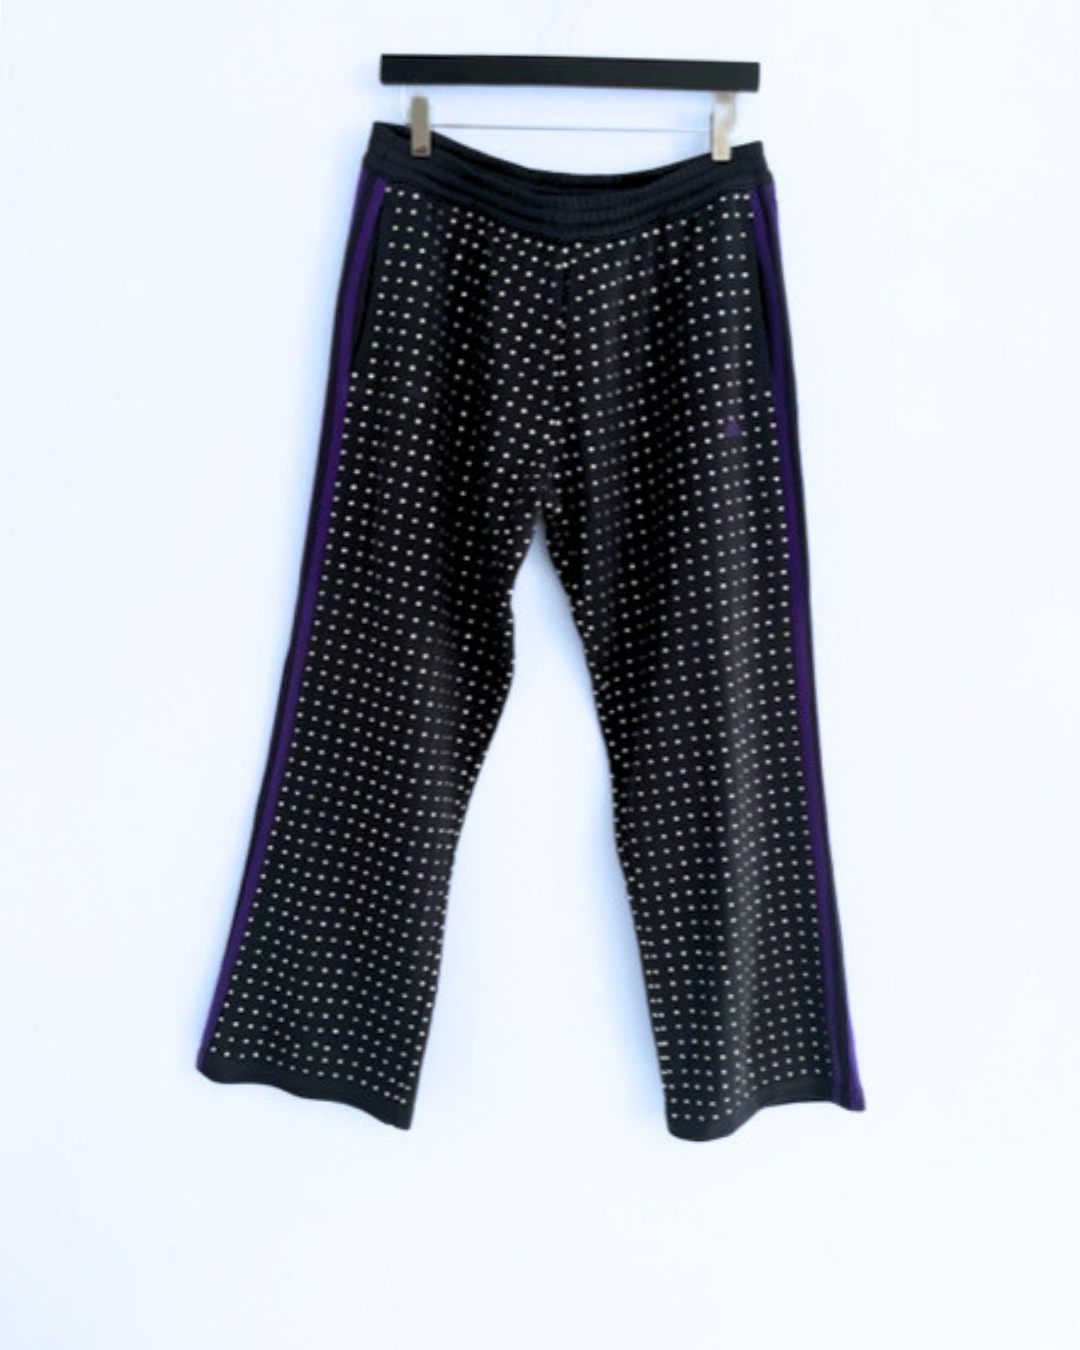 Vintage Grey/Purple Stripe ADIDAS Tracksuit pants with all over diamante studs